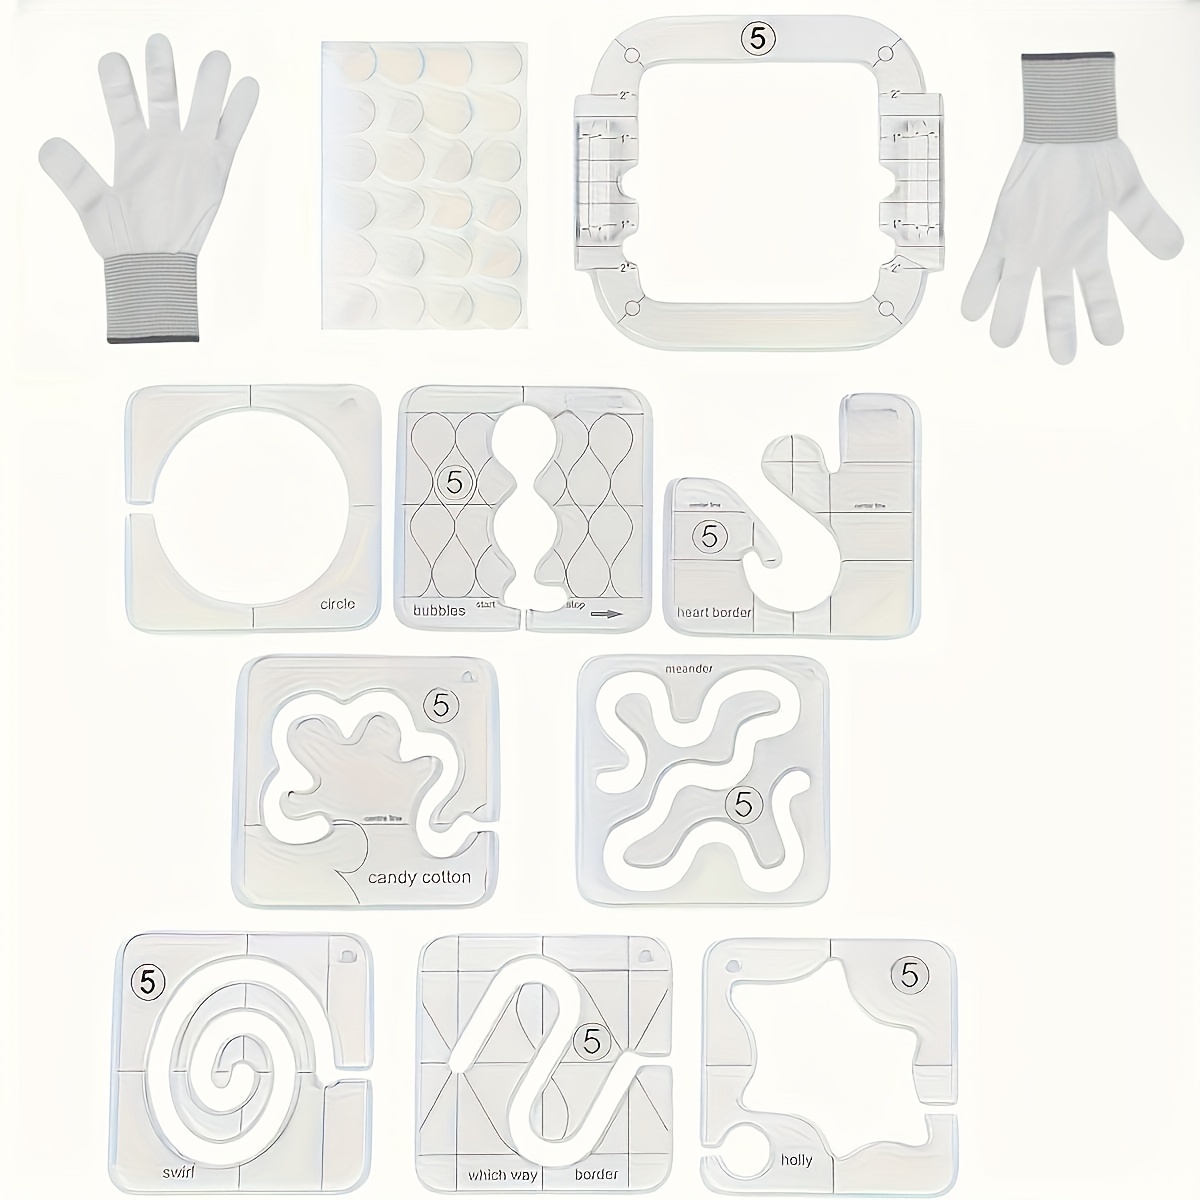 

12pcs Quilting Template Set With 8 Designs, Medium-size Quilting Gloves With Rubberized Fingertips, Frame, Stickers, Guide For Sewing - Breathable Fabric Craft Tools